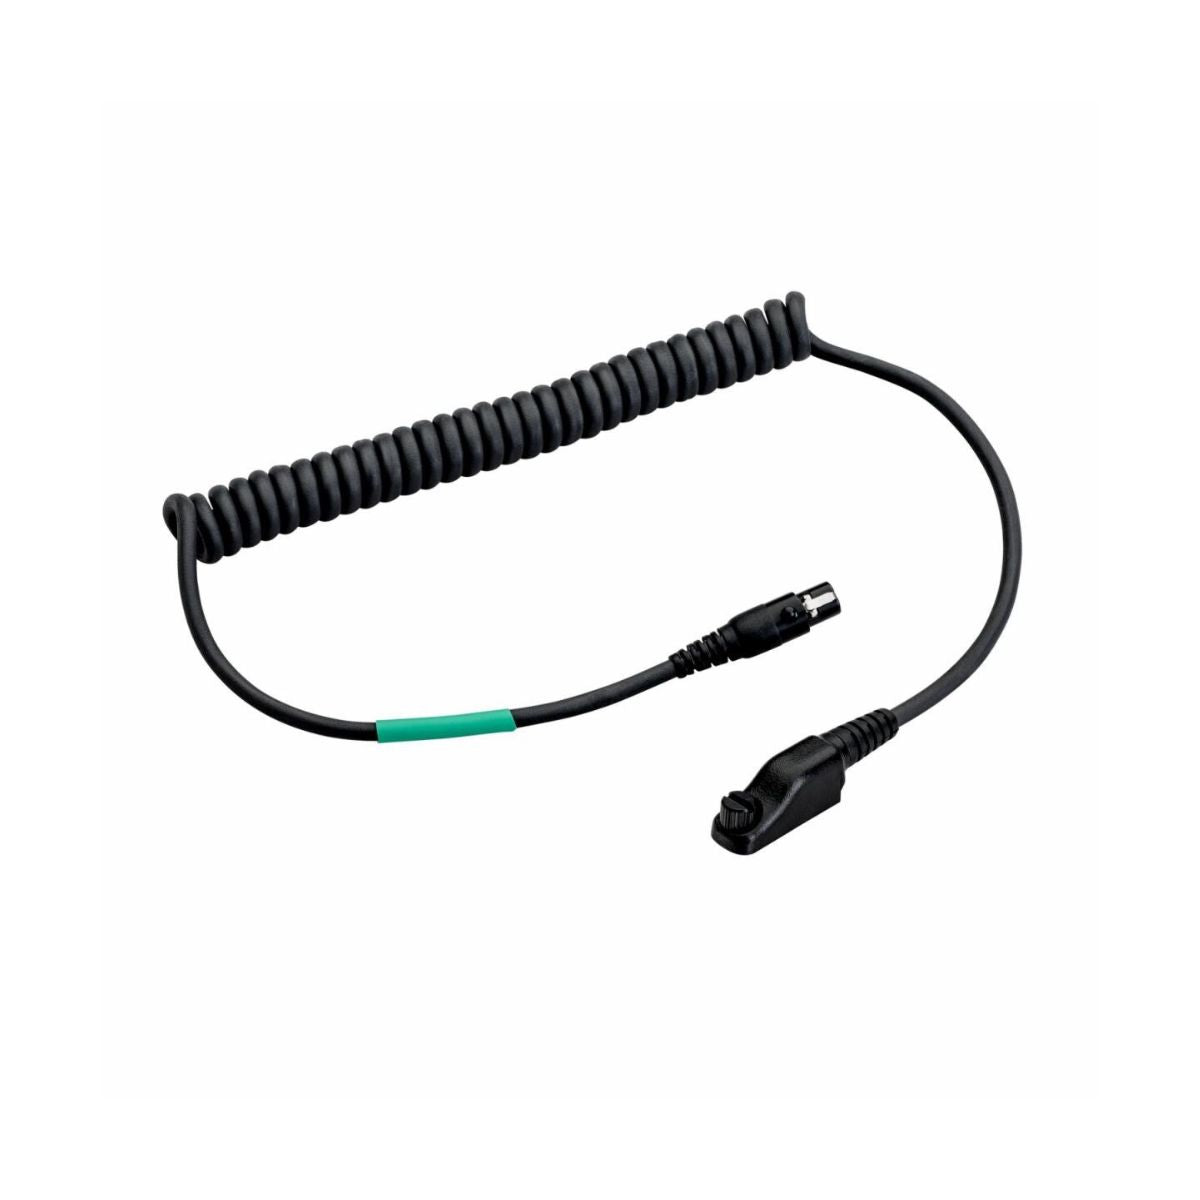 3M™ PELTOR™ FLX2 Cable, Icom Multipin S8 FLX2-44